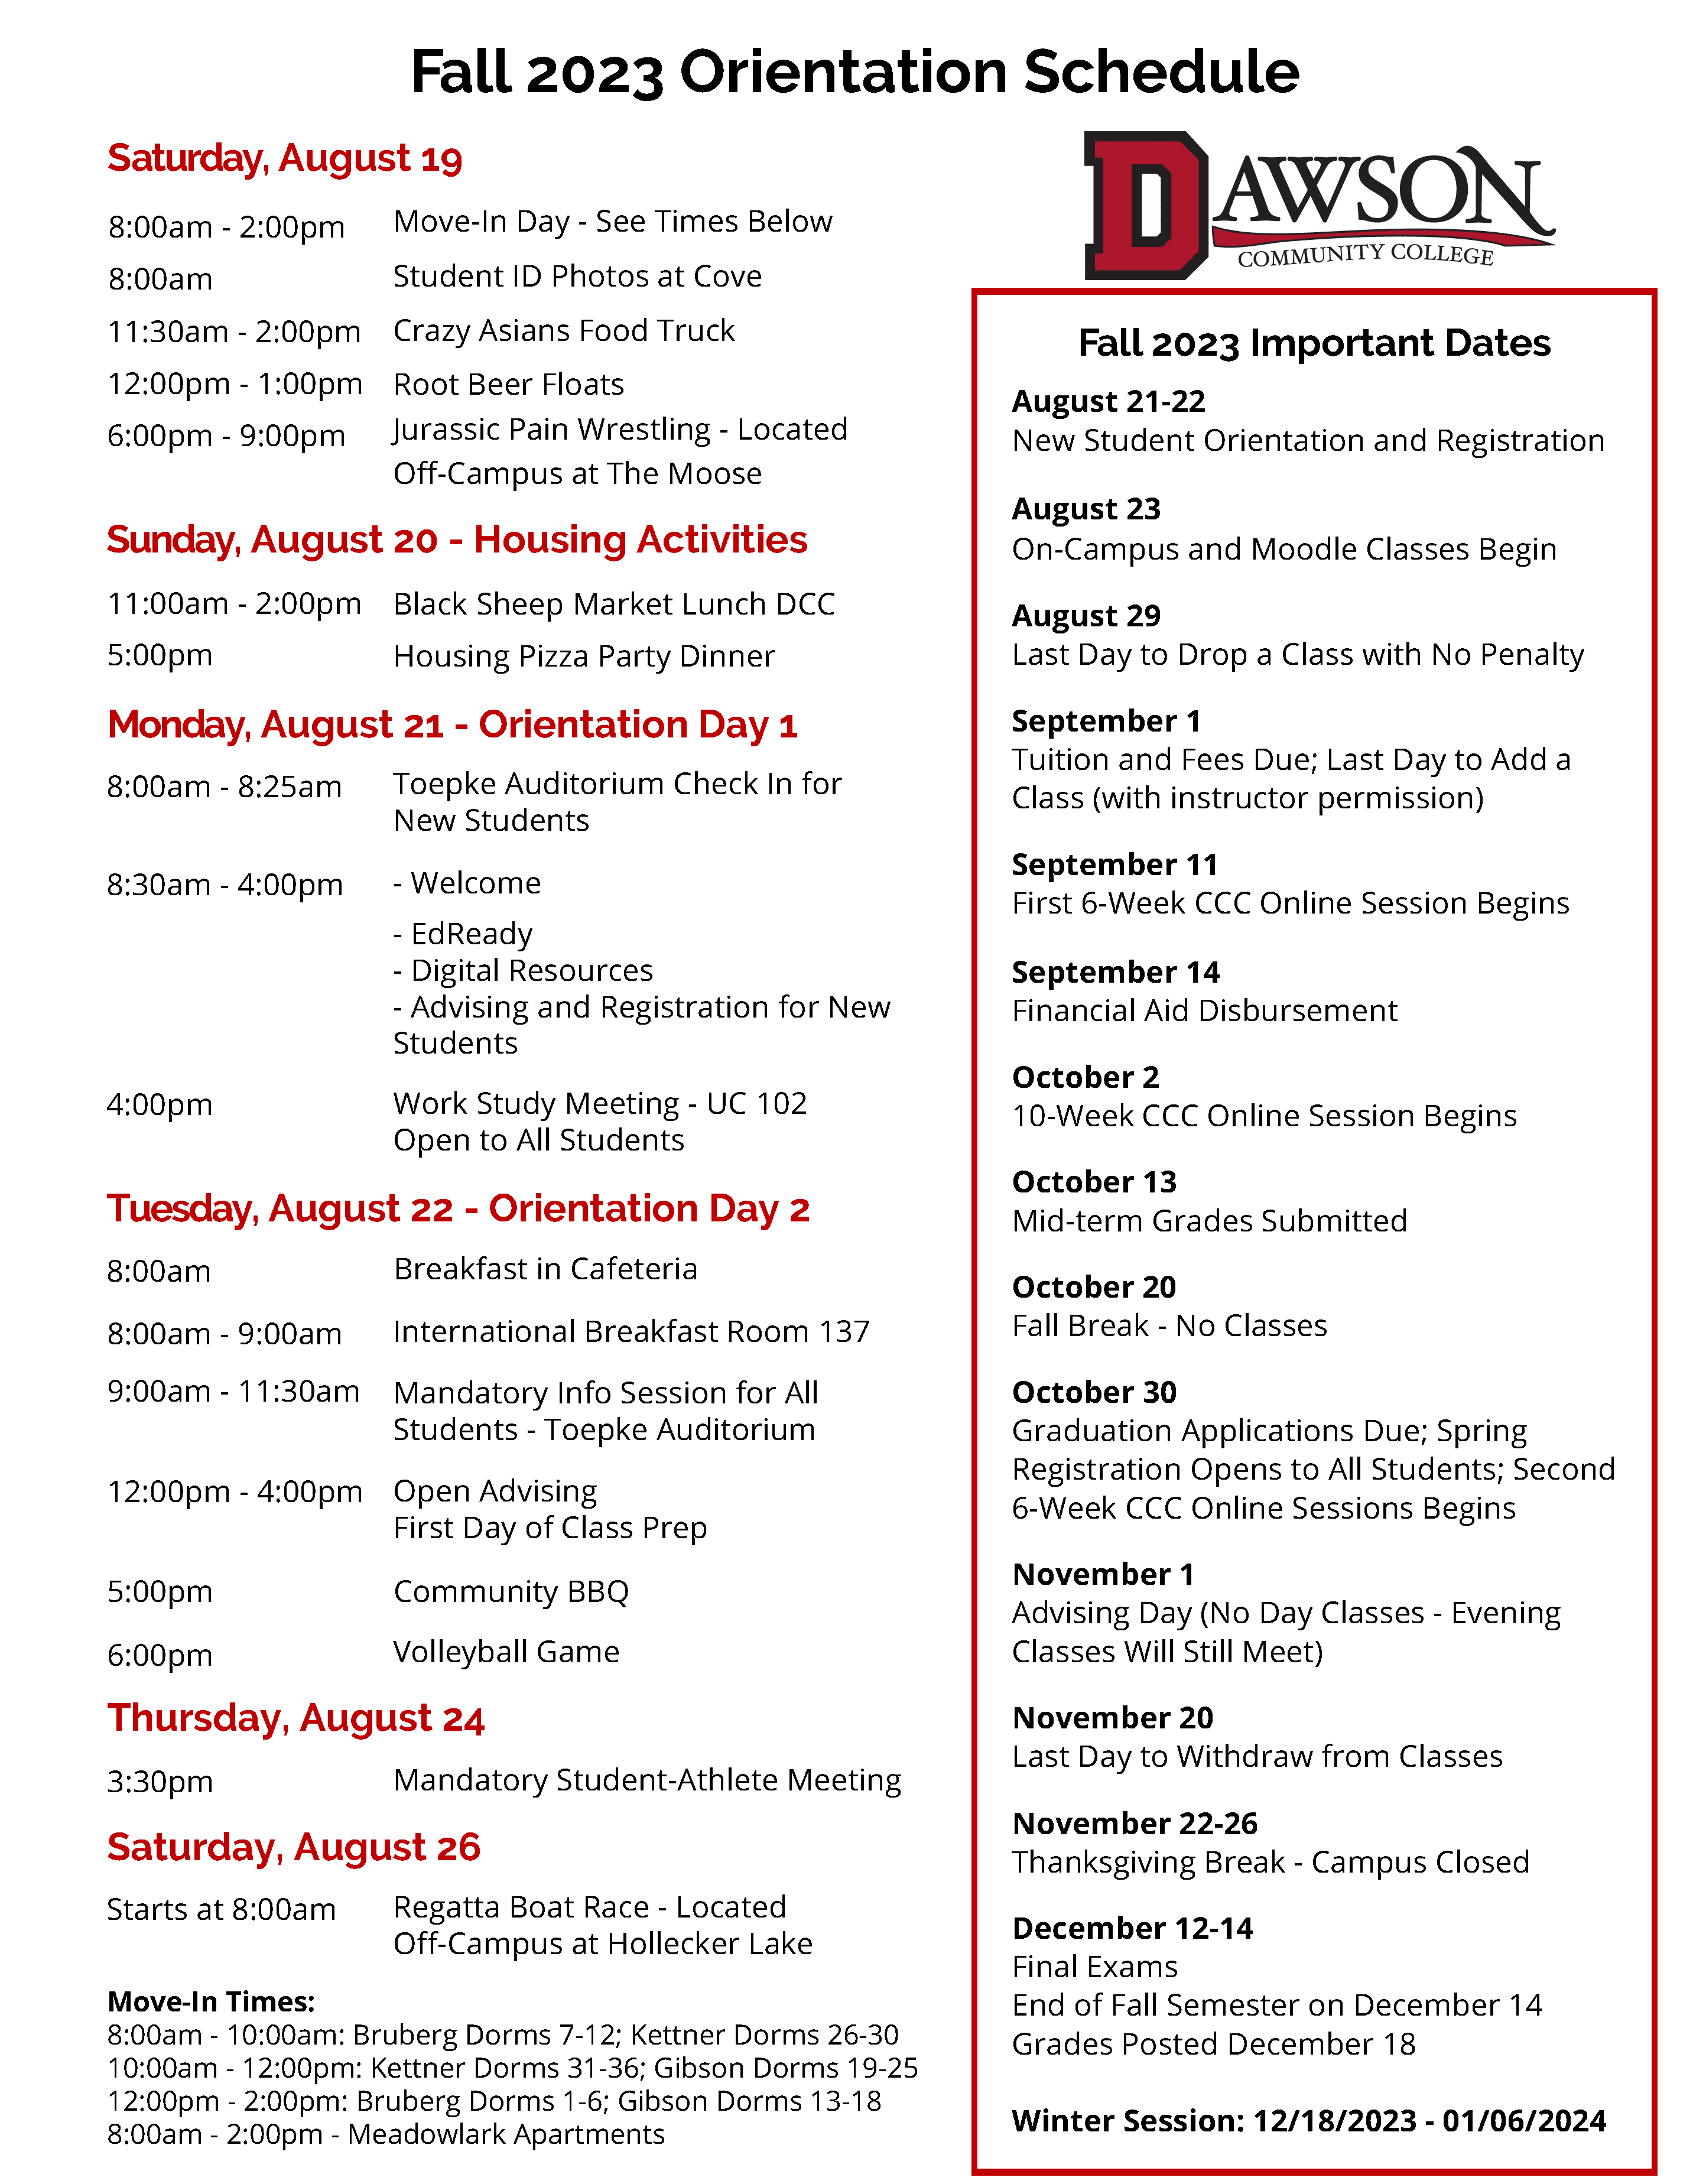 Fall 2023 Orientation Schedule and Events